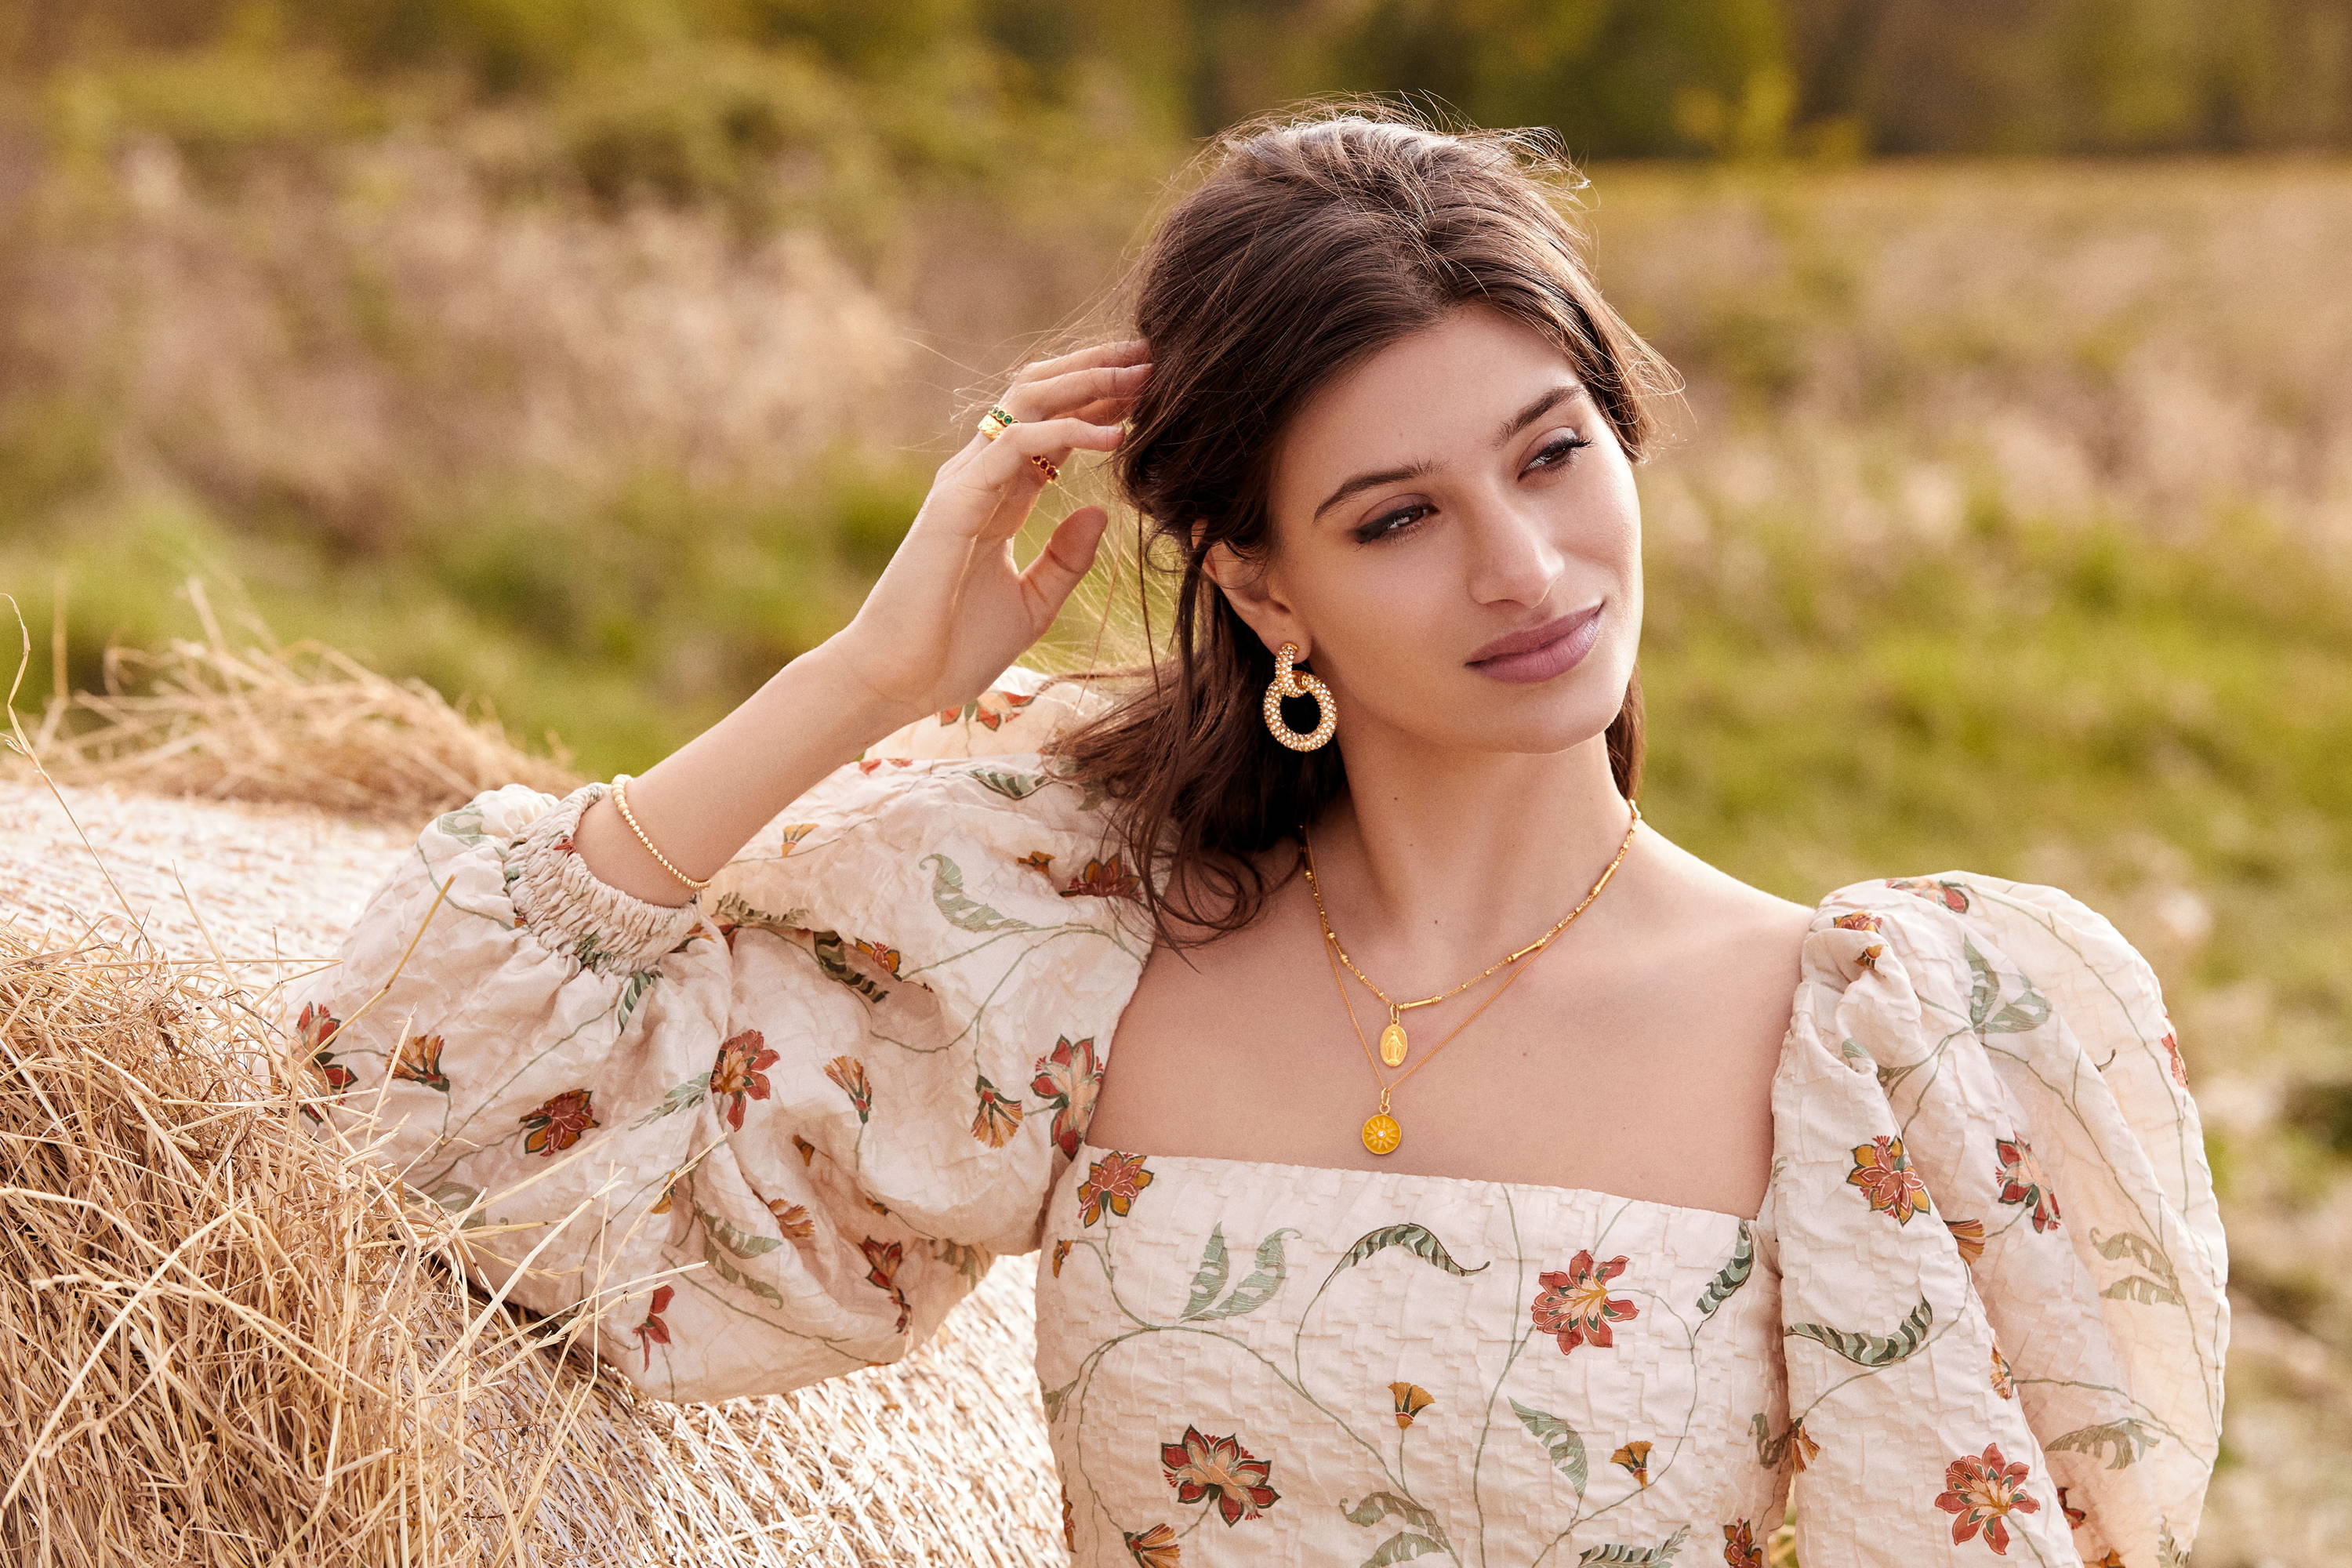 Cairo wears the Giovanna Earrings, Mini Pellegrino Necklace, Isola Bella Necklace, Graziella Bracelet, Green Etruria Ring, Red Etruria Ring and Laurel Ring